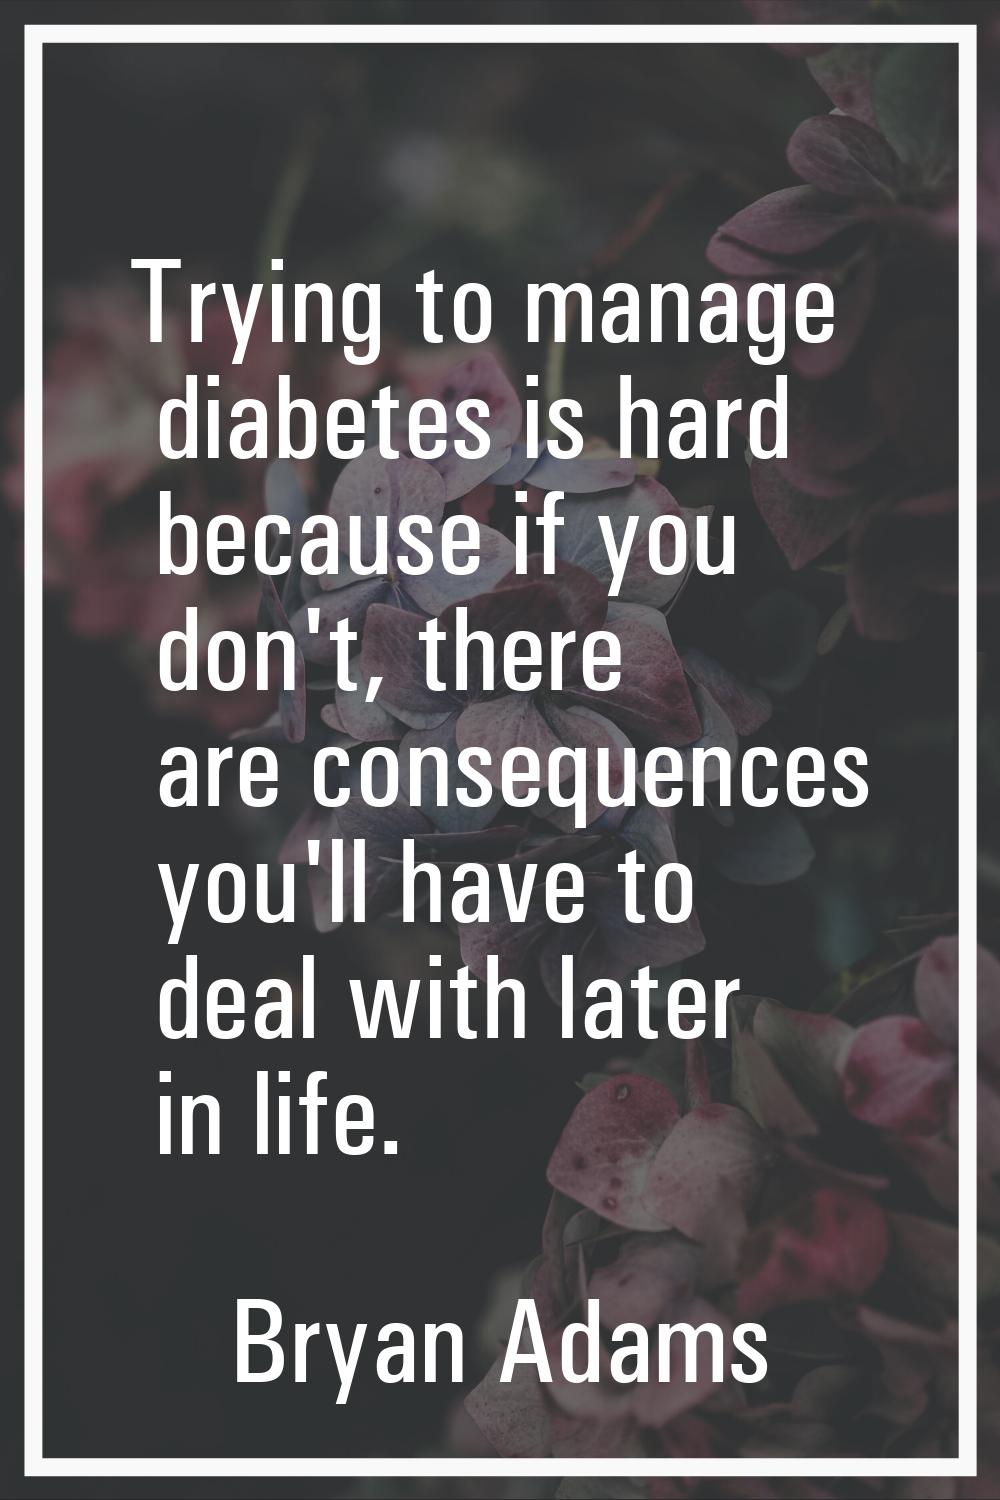 Trying to manage diabetes is hard because if you don't, there are consequences you'll have to deal 